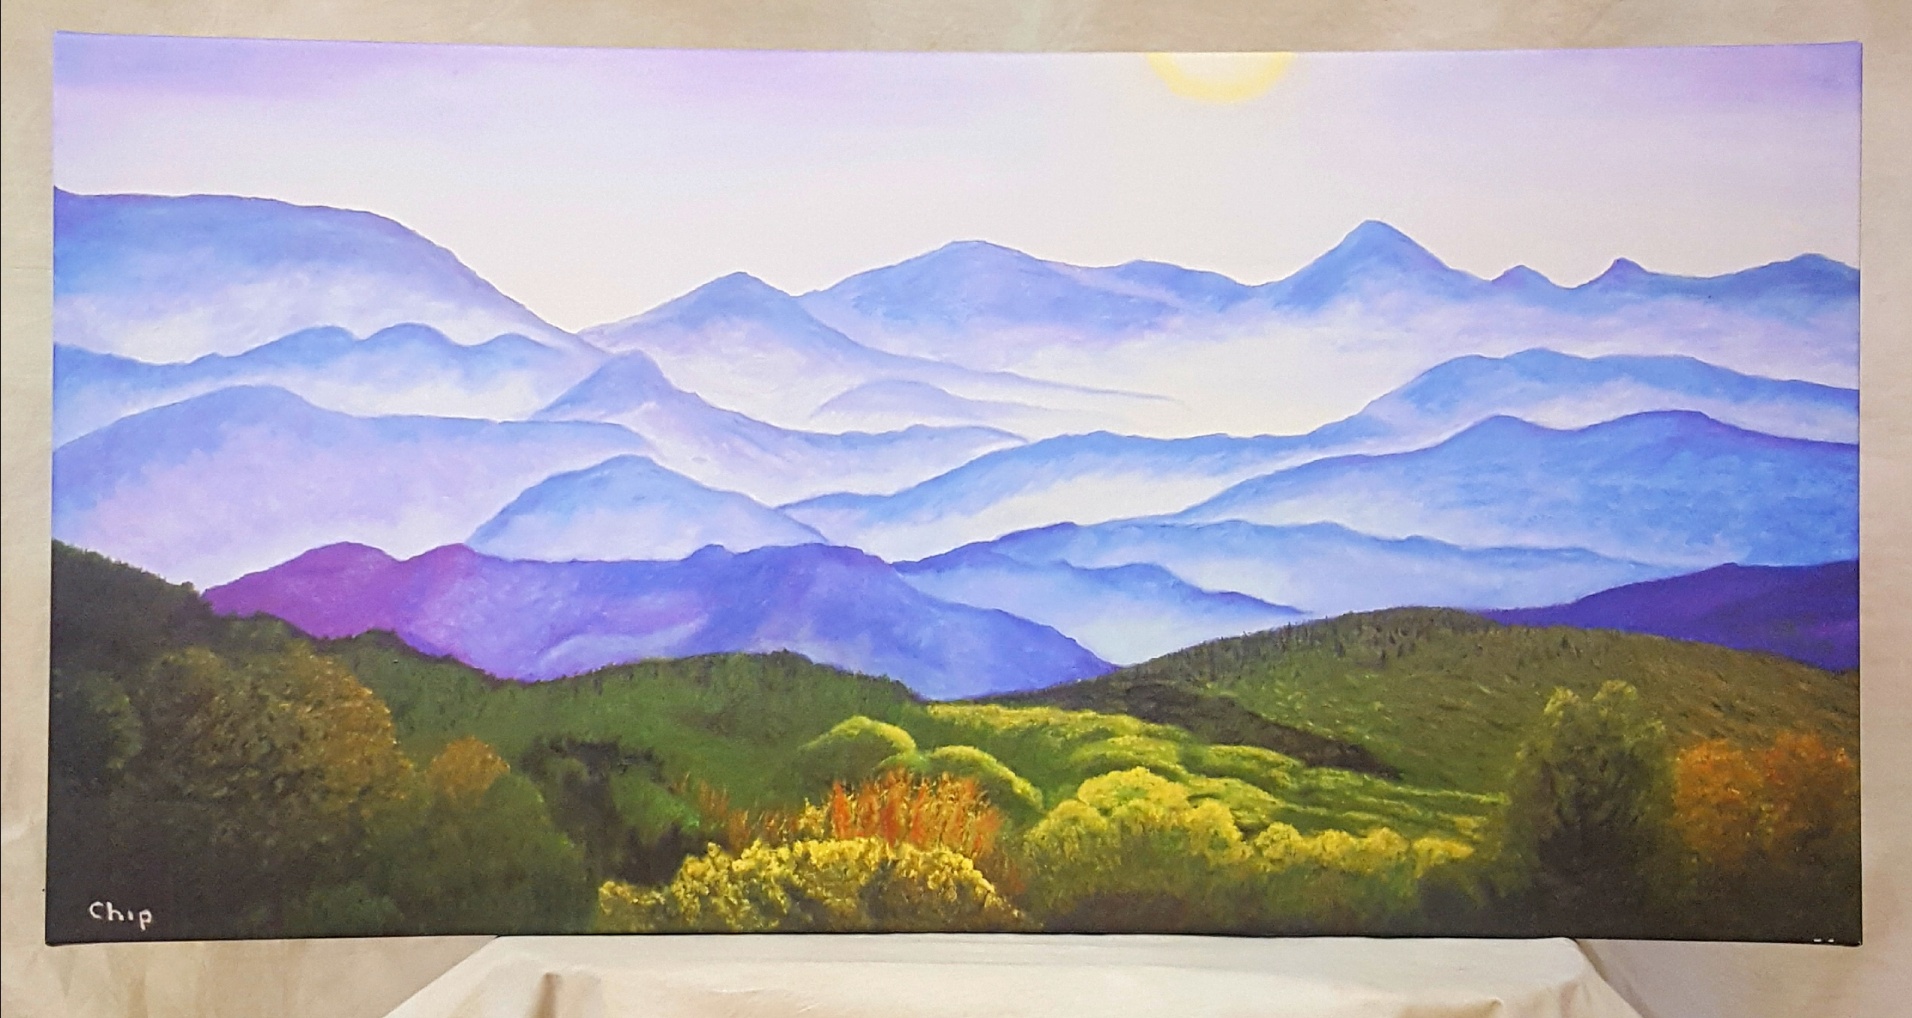 CH "Appalachian Mountains" Print Calabash Local Art and Wines